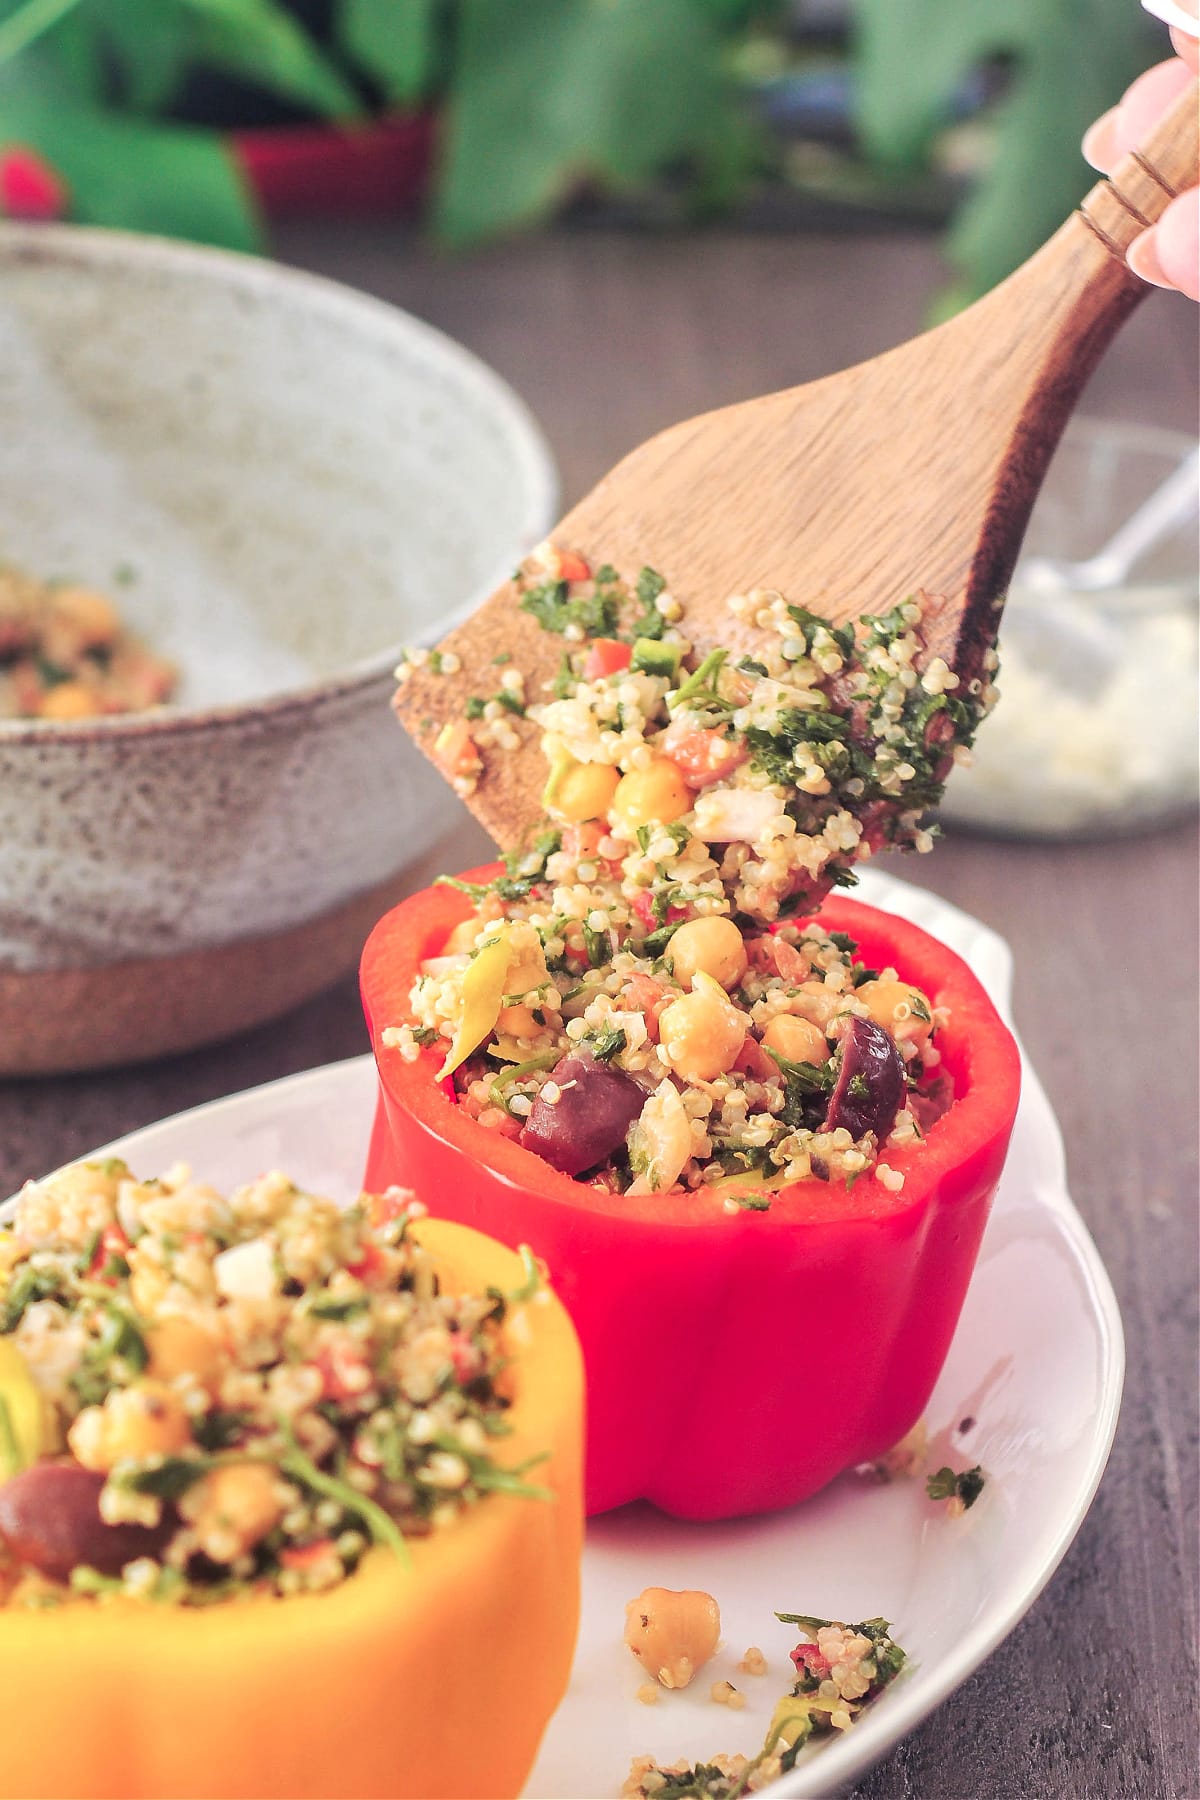 An orange and a red bell pepper with the tops cut off. A flat wooden spoon is filling the peppers with a chickpea tabbouleh salad. Peppers are sitting in a white oval dish on a dark wood table, with a grey bowl filled with more tabbouleh salad.